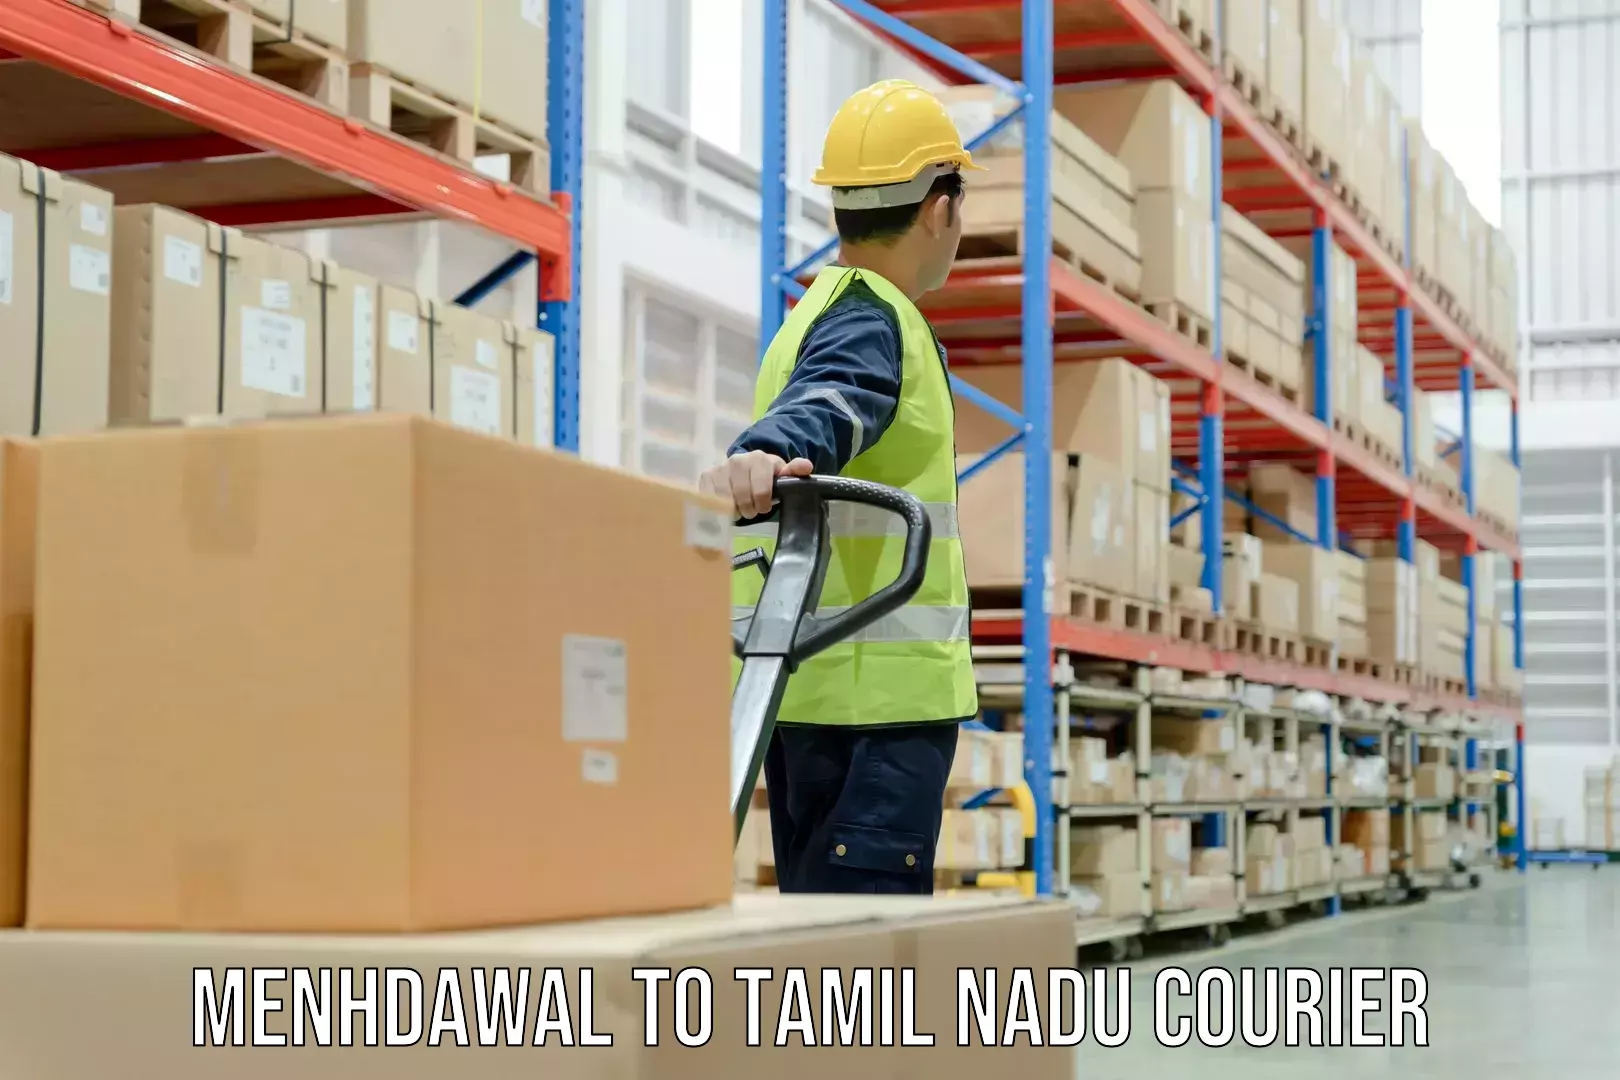 Customized delivery options Menhdawal to Thondi